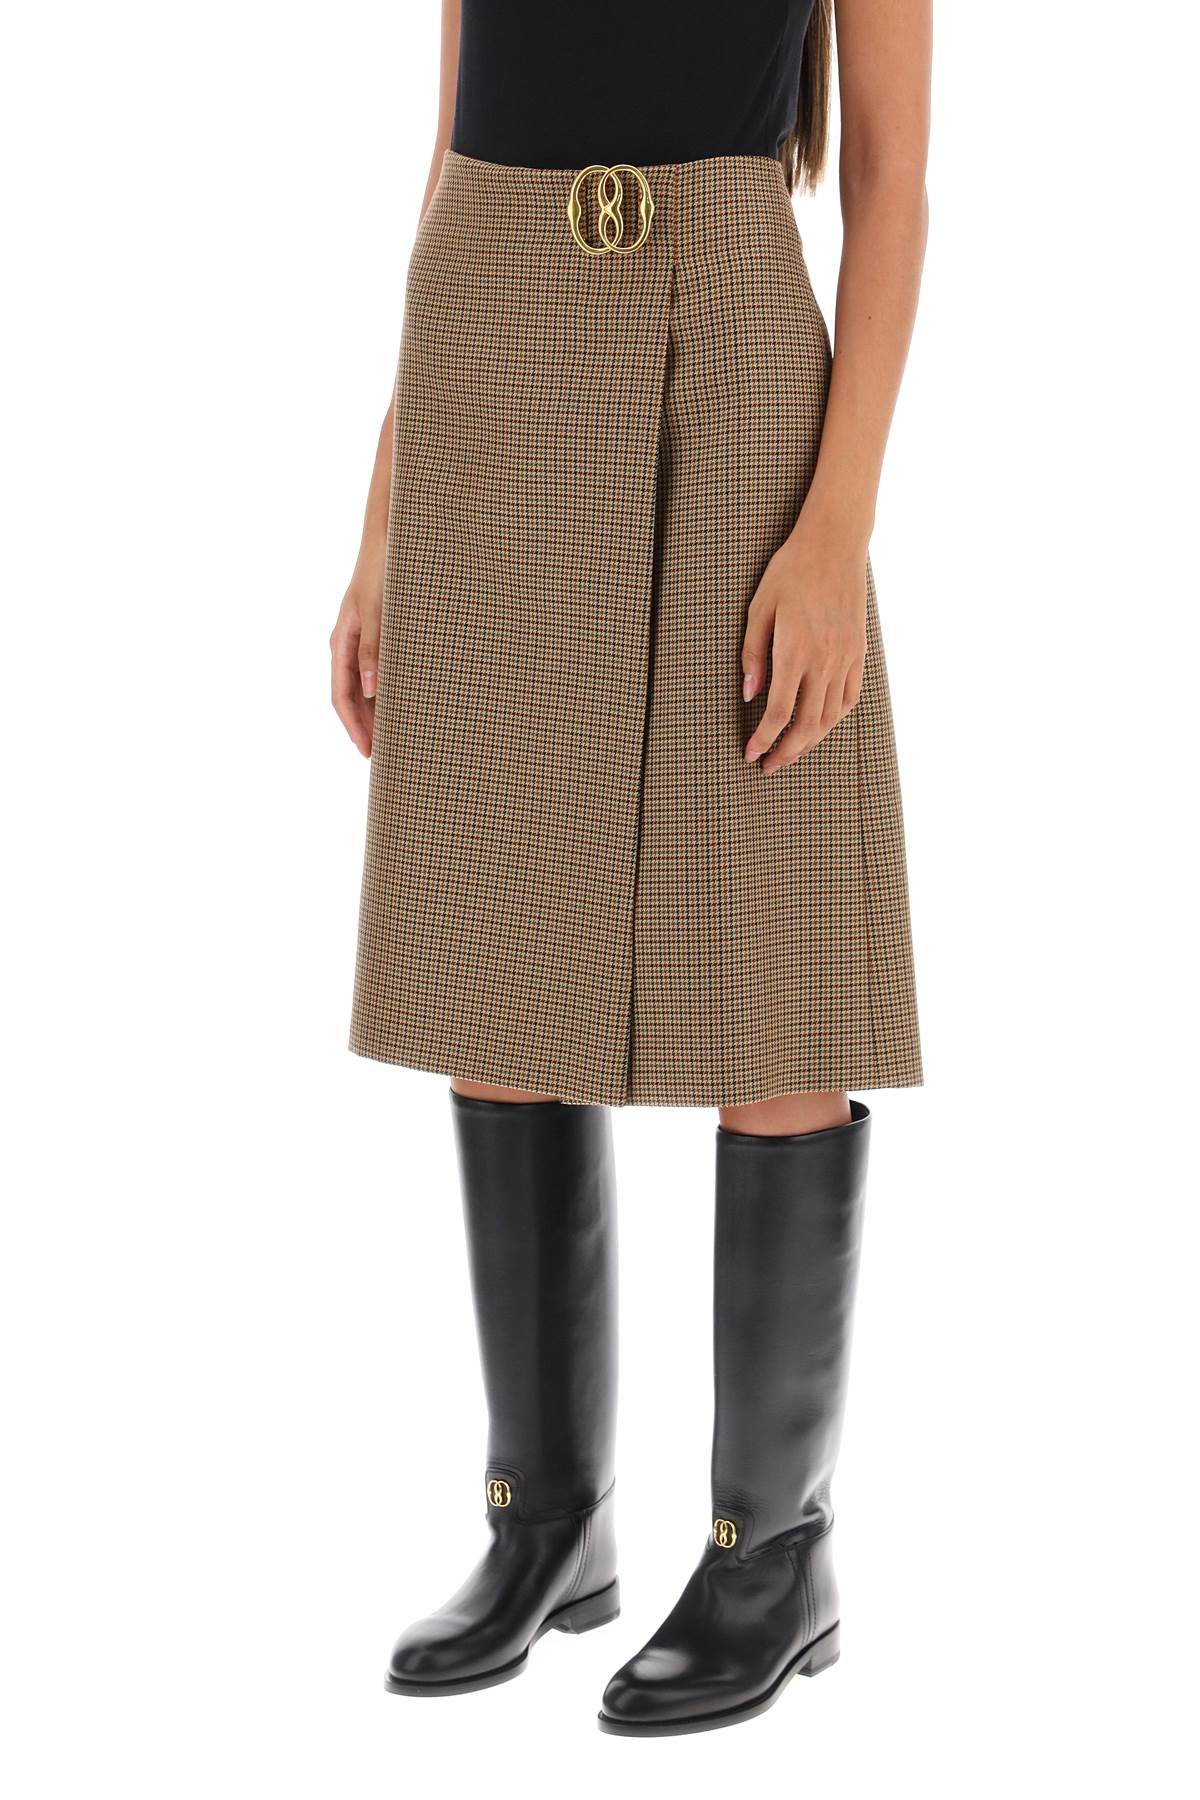 Bally houndstooth a-line skirt with emblem buckle-3